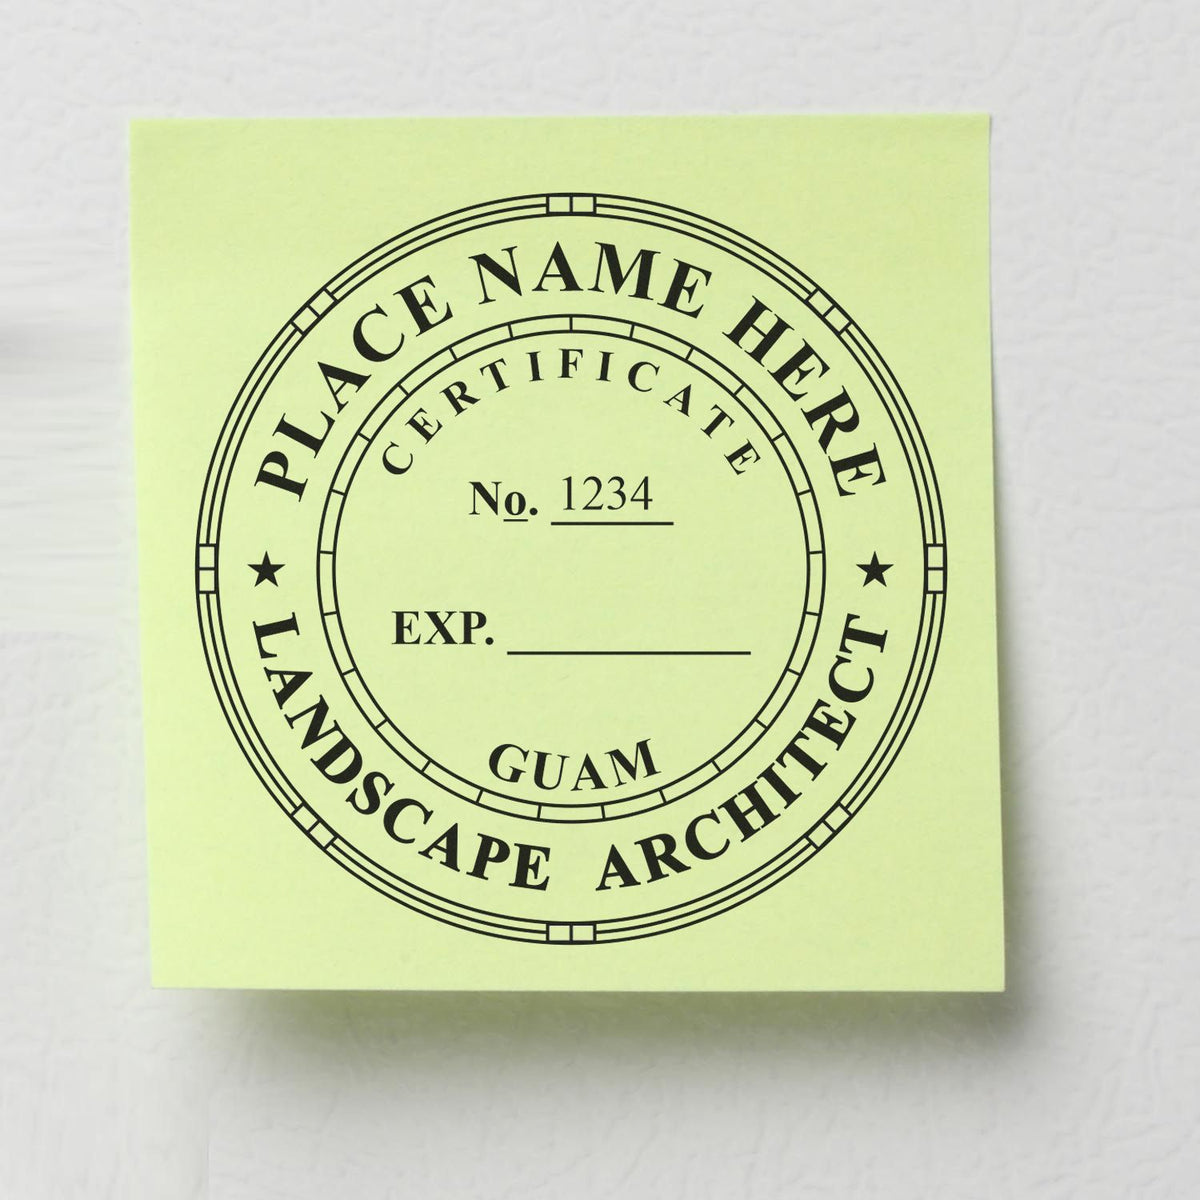 A photograph of the Self-Inking Guam Landscape Architect Stamp stamp impression reveals a vivid, professional image of the on paper.